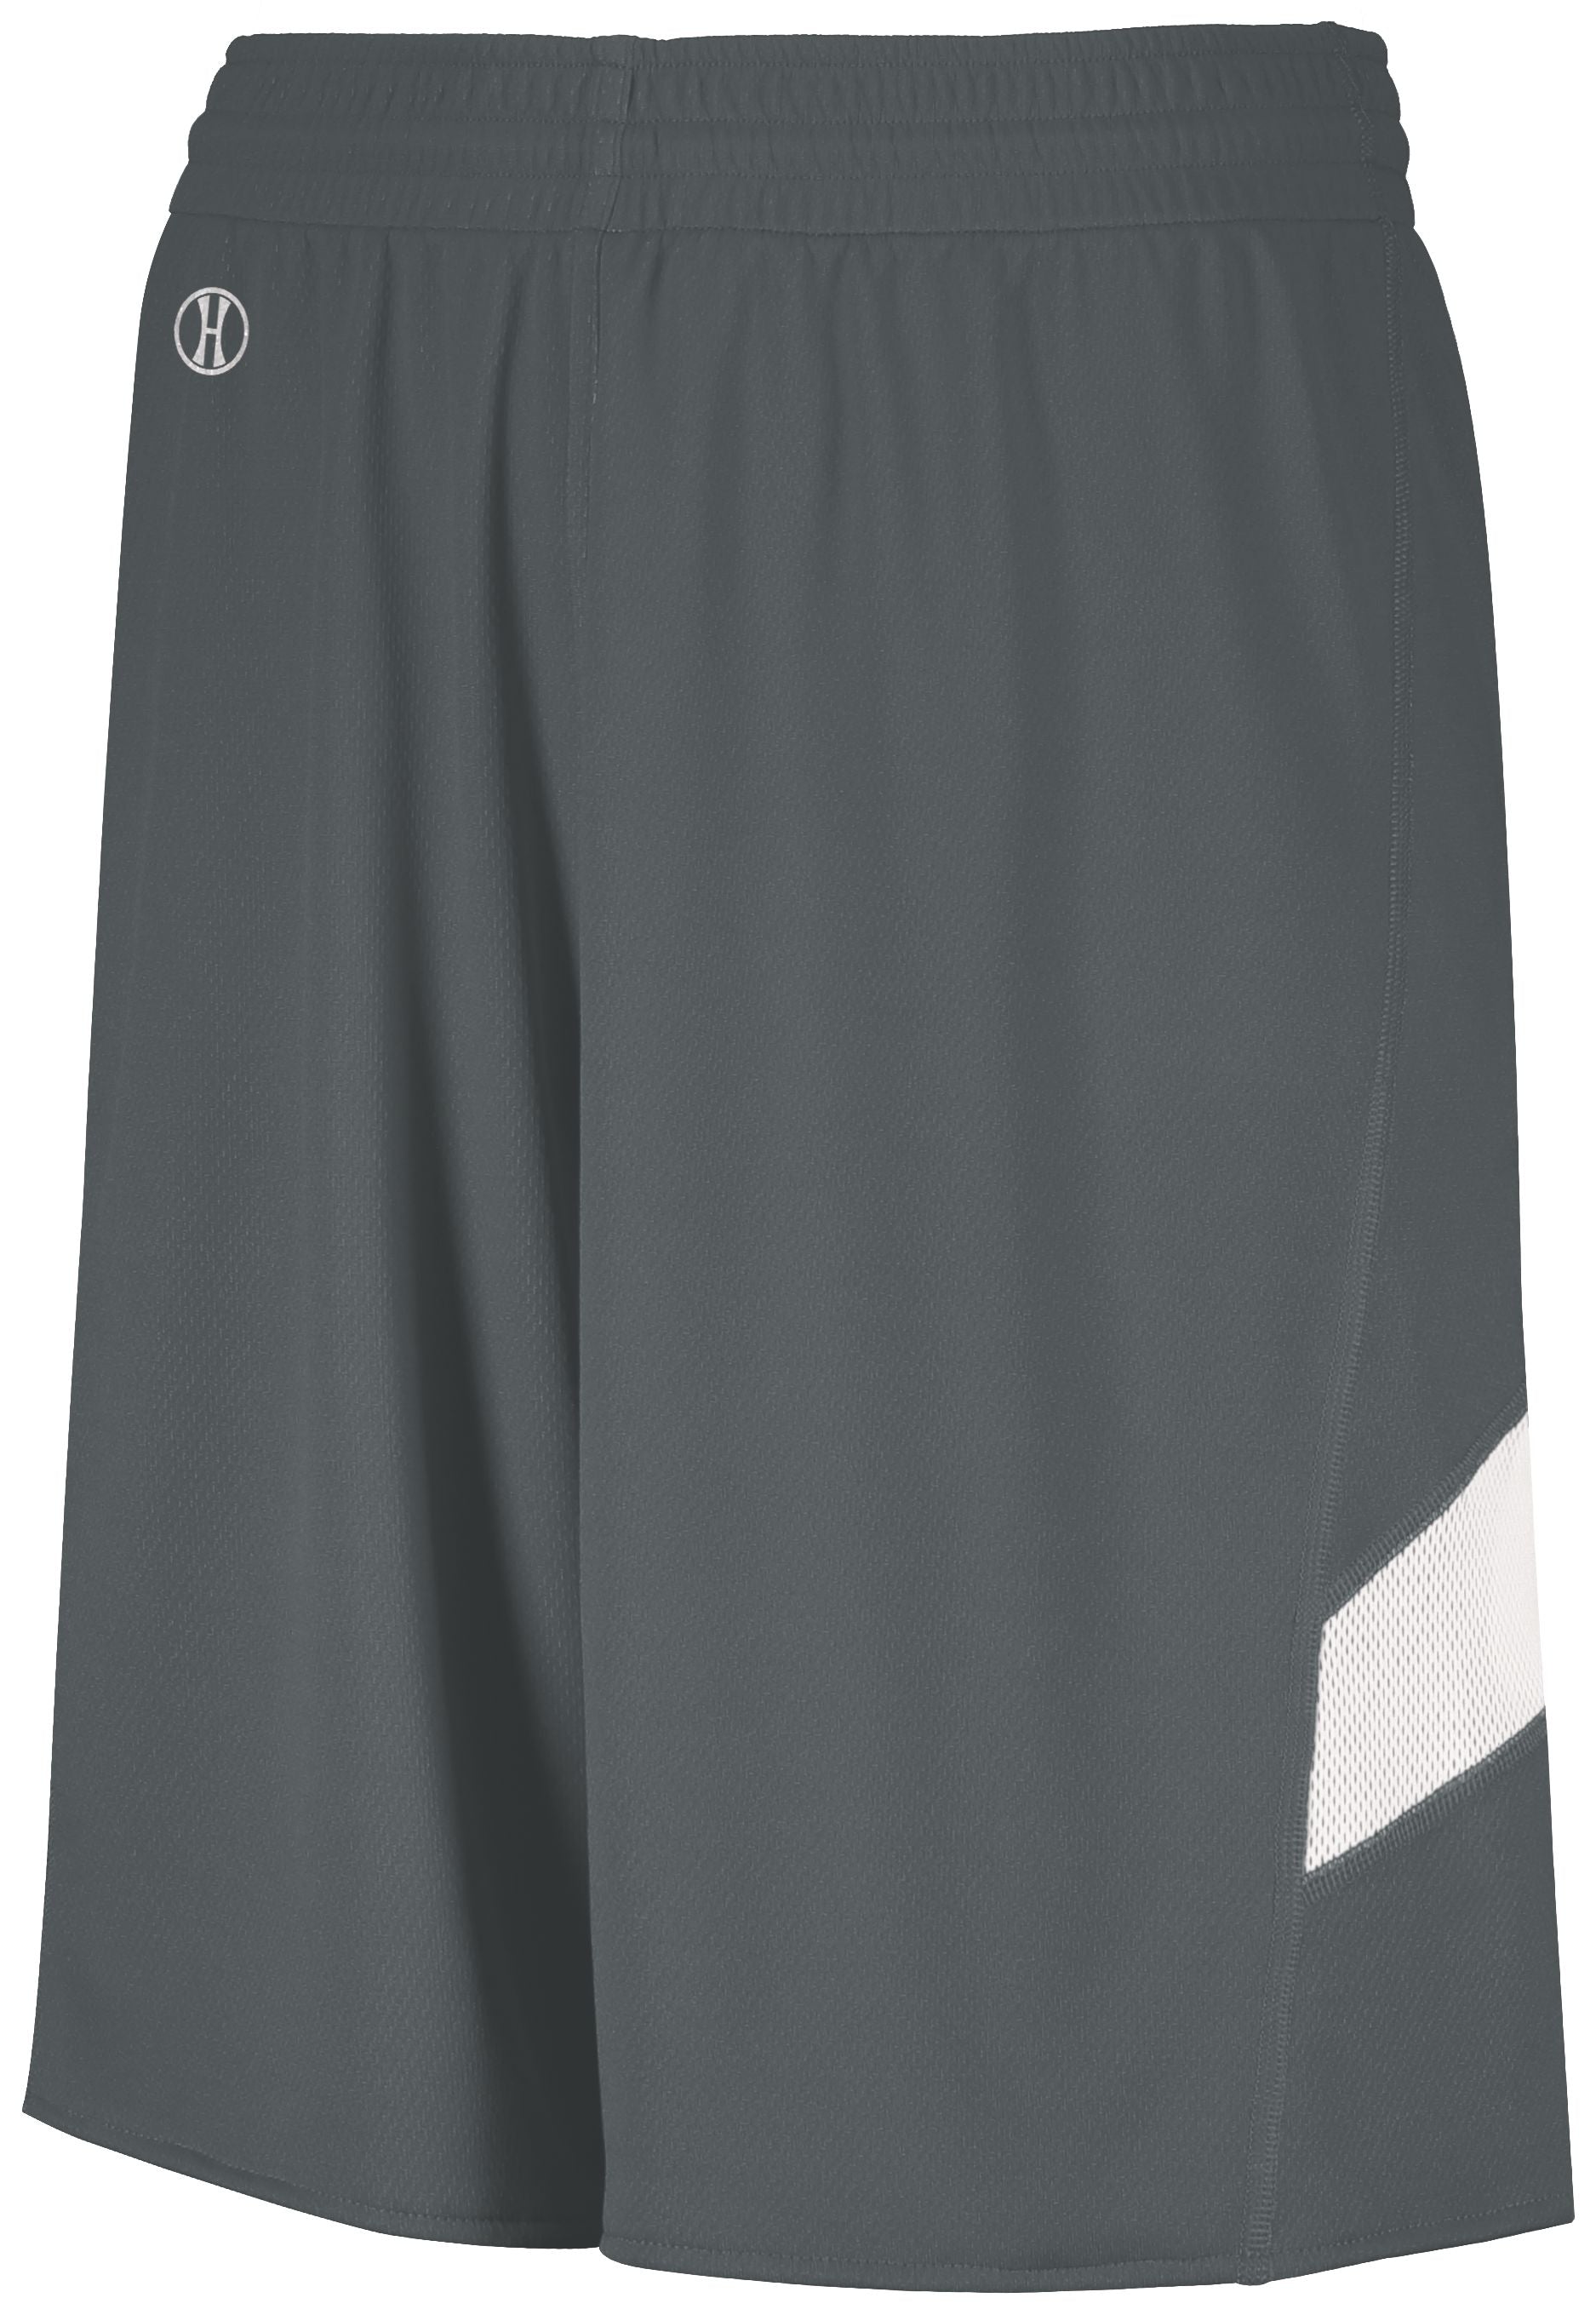 Holloway Youth Dual-Side Single Ply Basketball Shorts in Graphite/White  -Part of the Youth, Youth-Shorts, Basketball, Holloway, All-Sports, All-Sports-1 product lines at KanaleyCreations.com